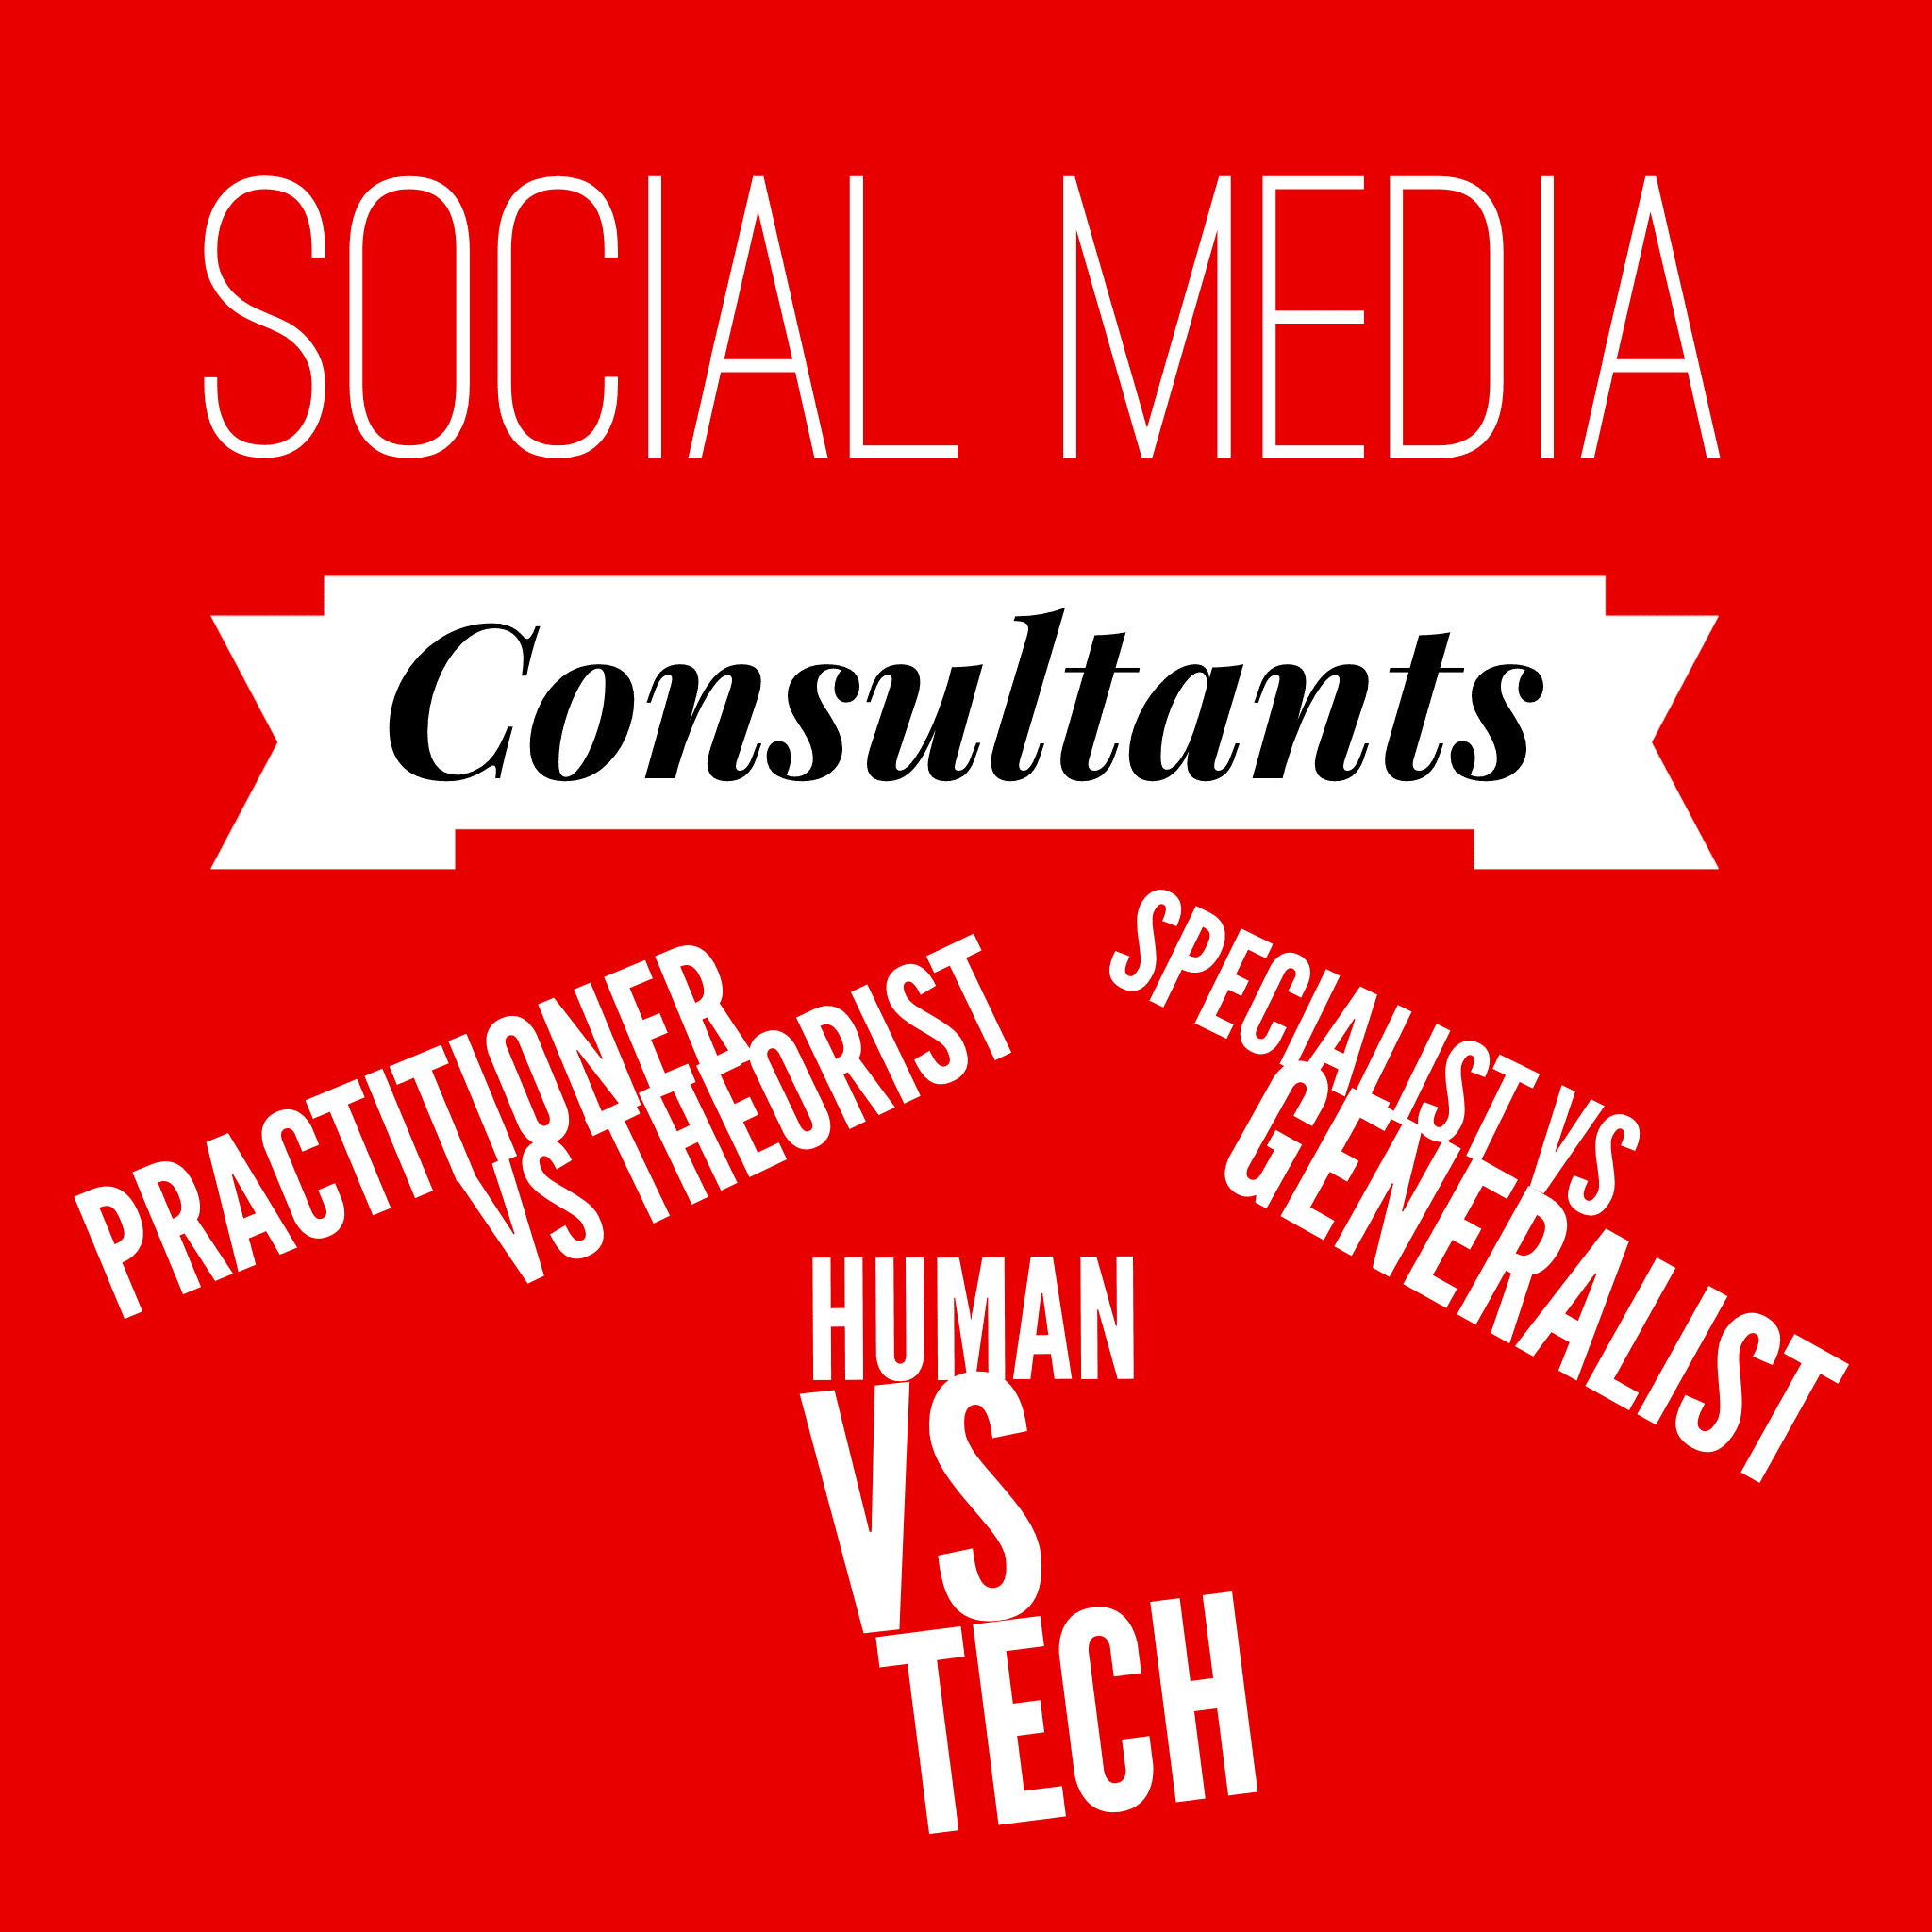 Social Media Consultants: Practitioners Vs Theorists, Specialists Vs Generalists, People Vs Tech